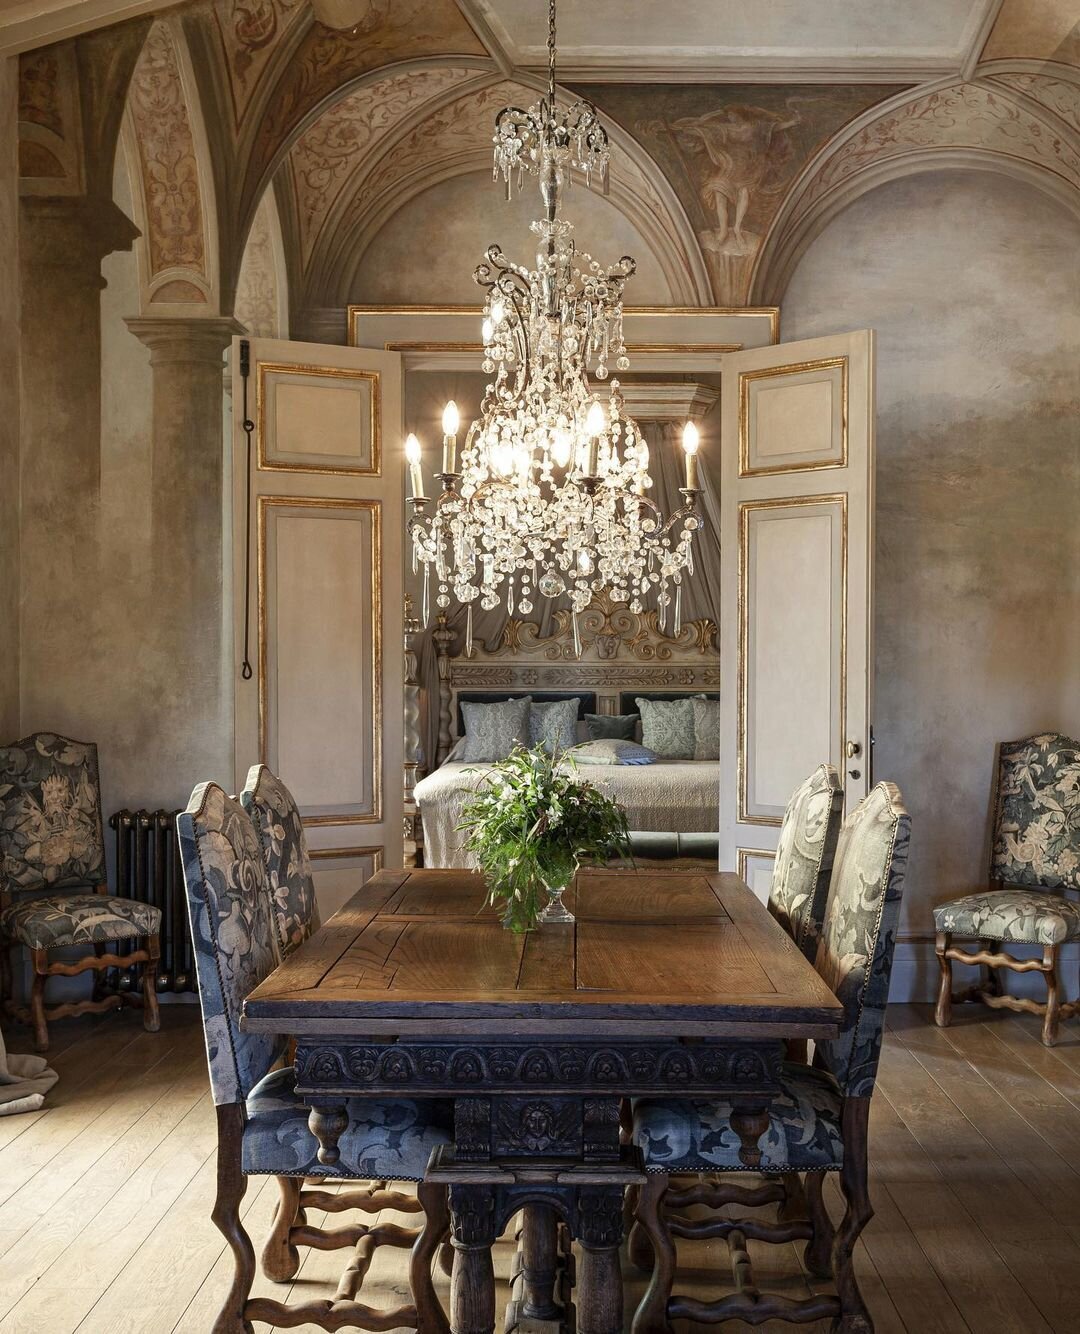 An antique wooden dining table surrounded by dining chairs upholstered in floral fabric at Borgo Santo Pietro